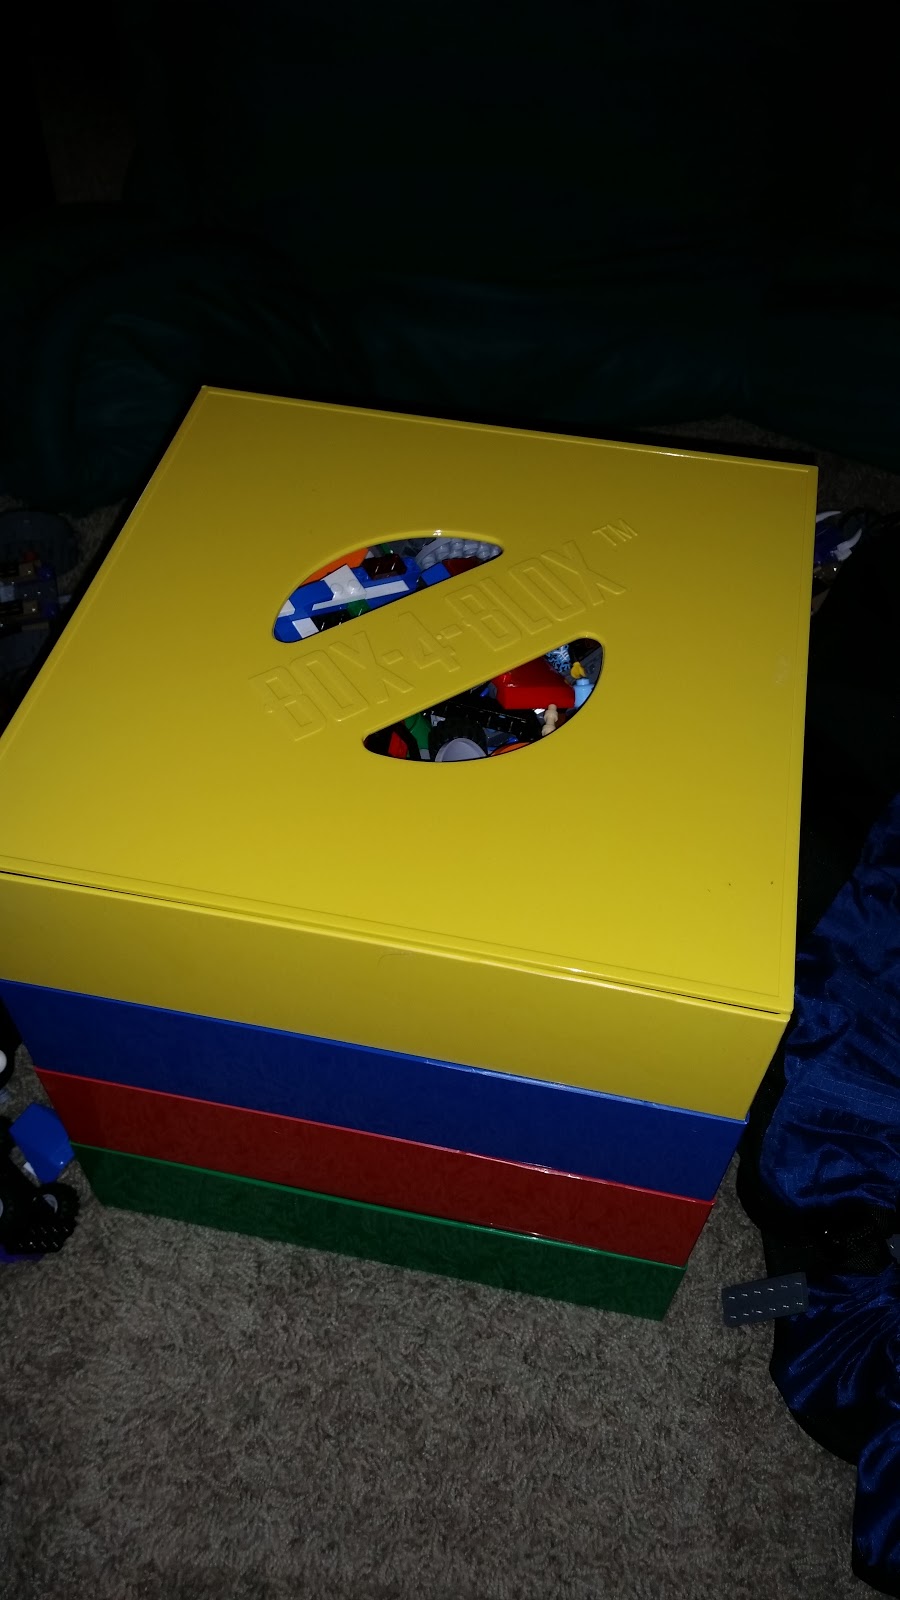 Box4Blox Lego Sorter Giveaway (Ends 4/12/15) - It's Free At Last